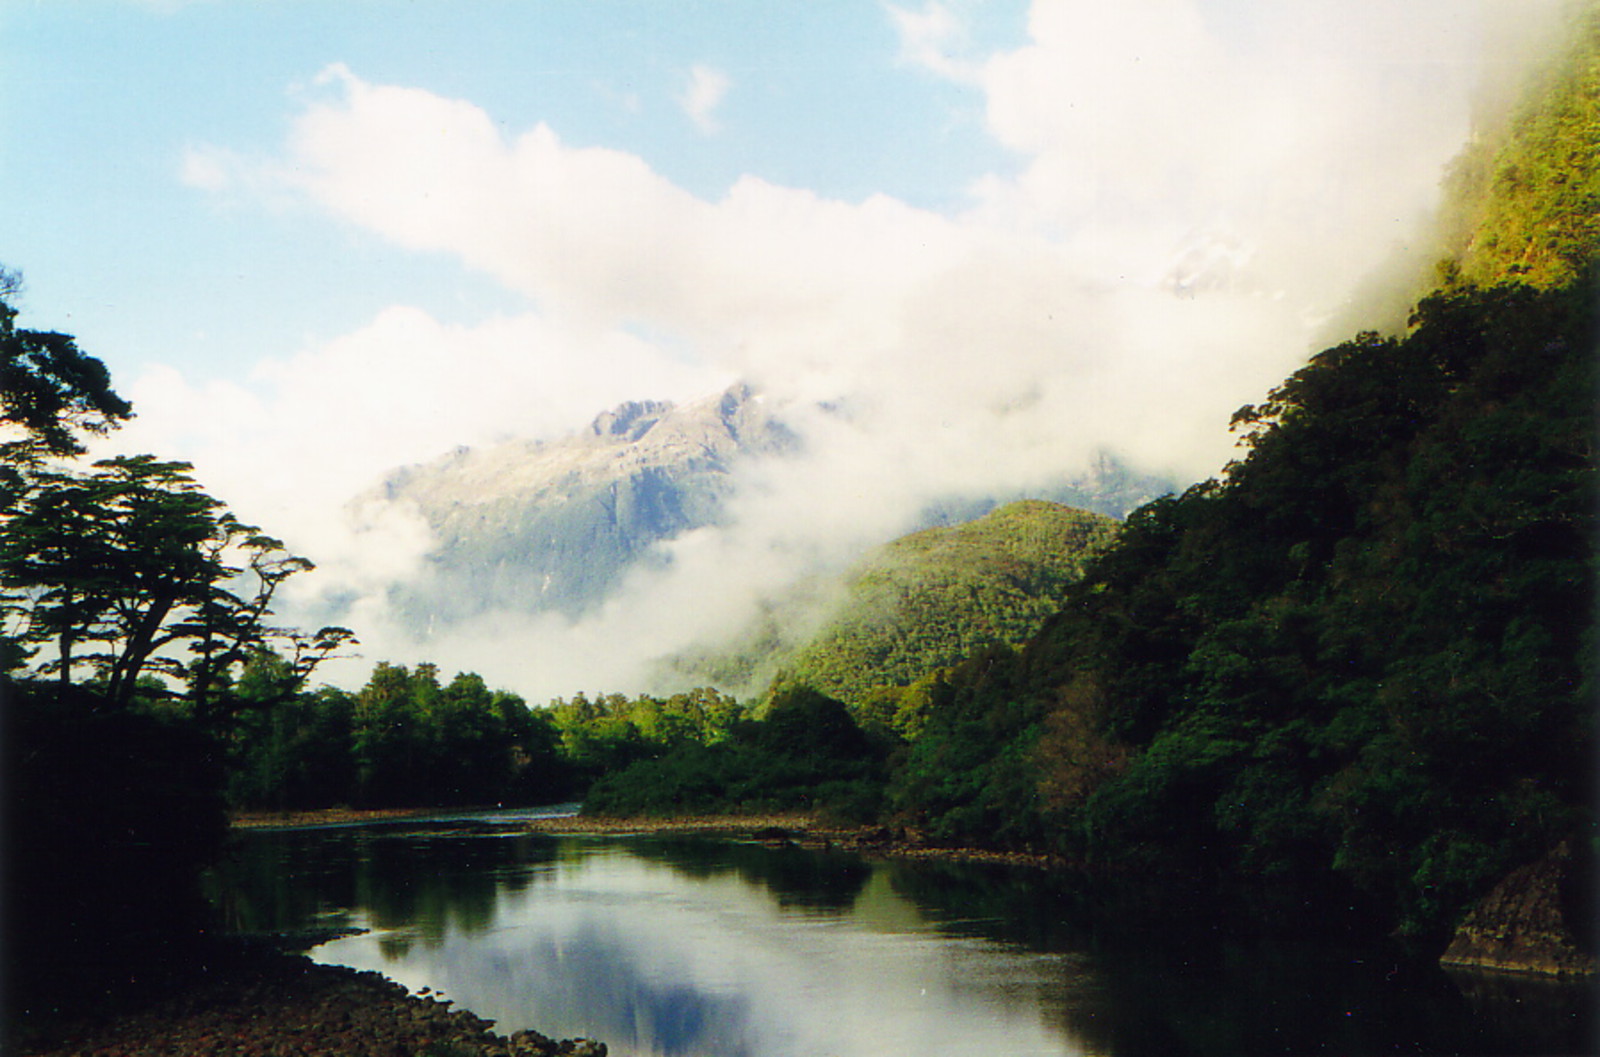 The Hollyford River